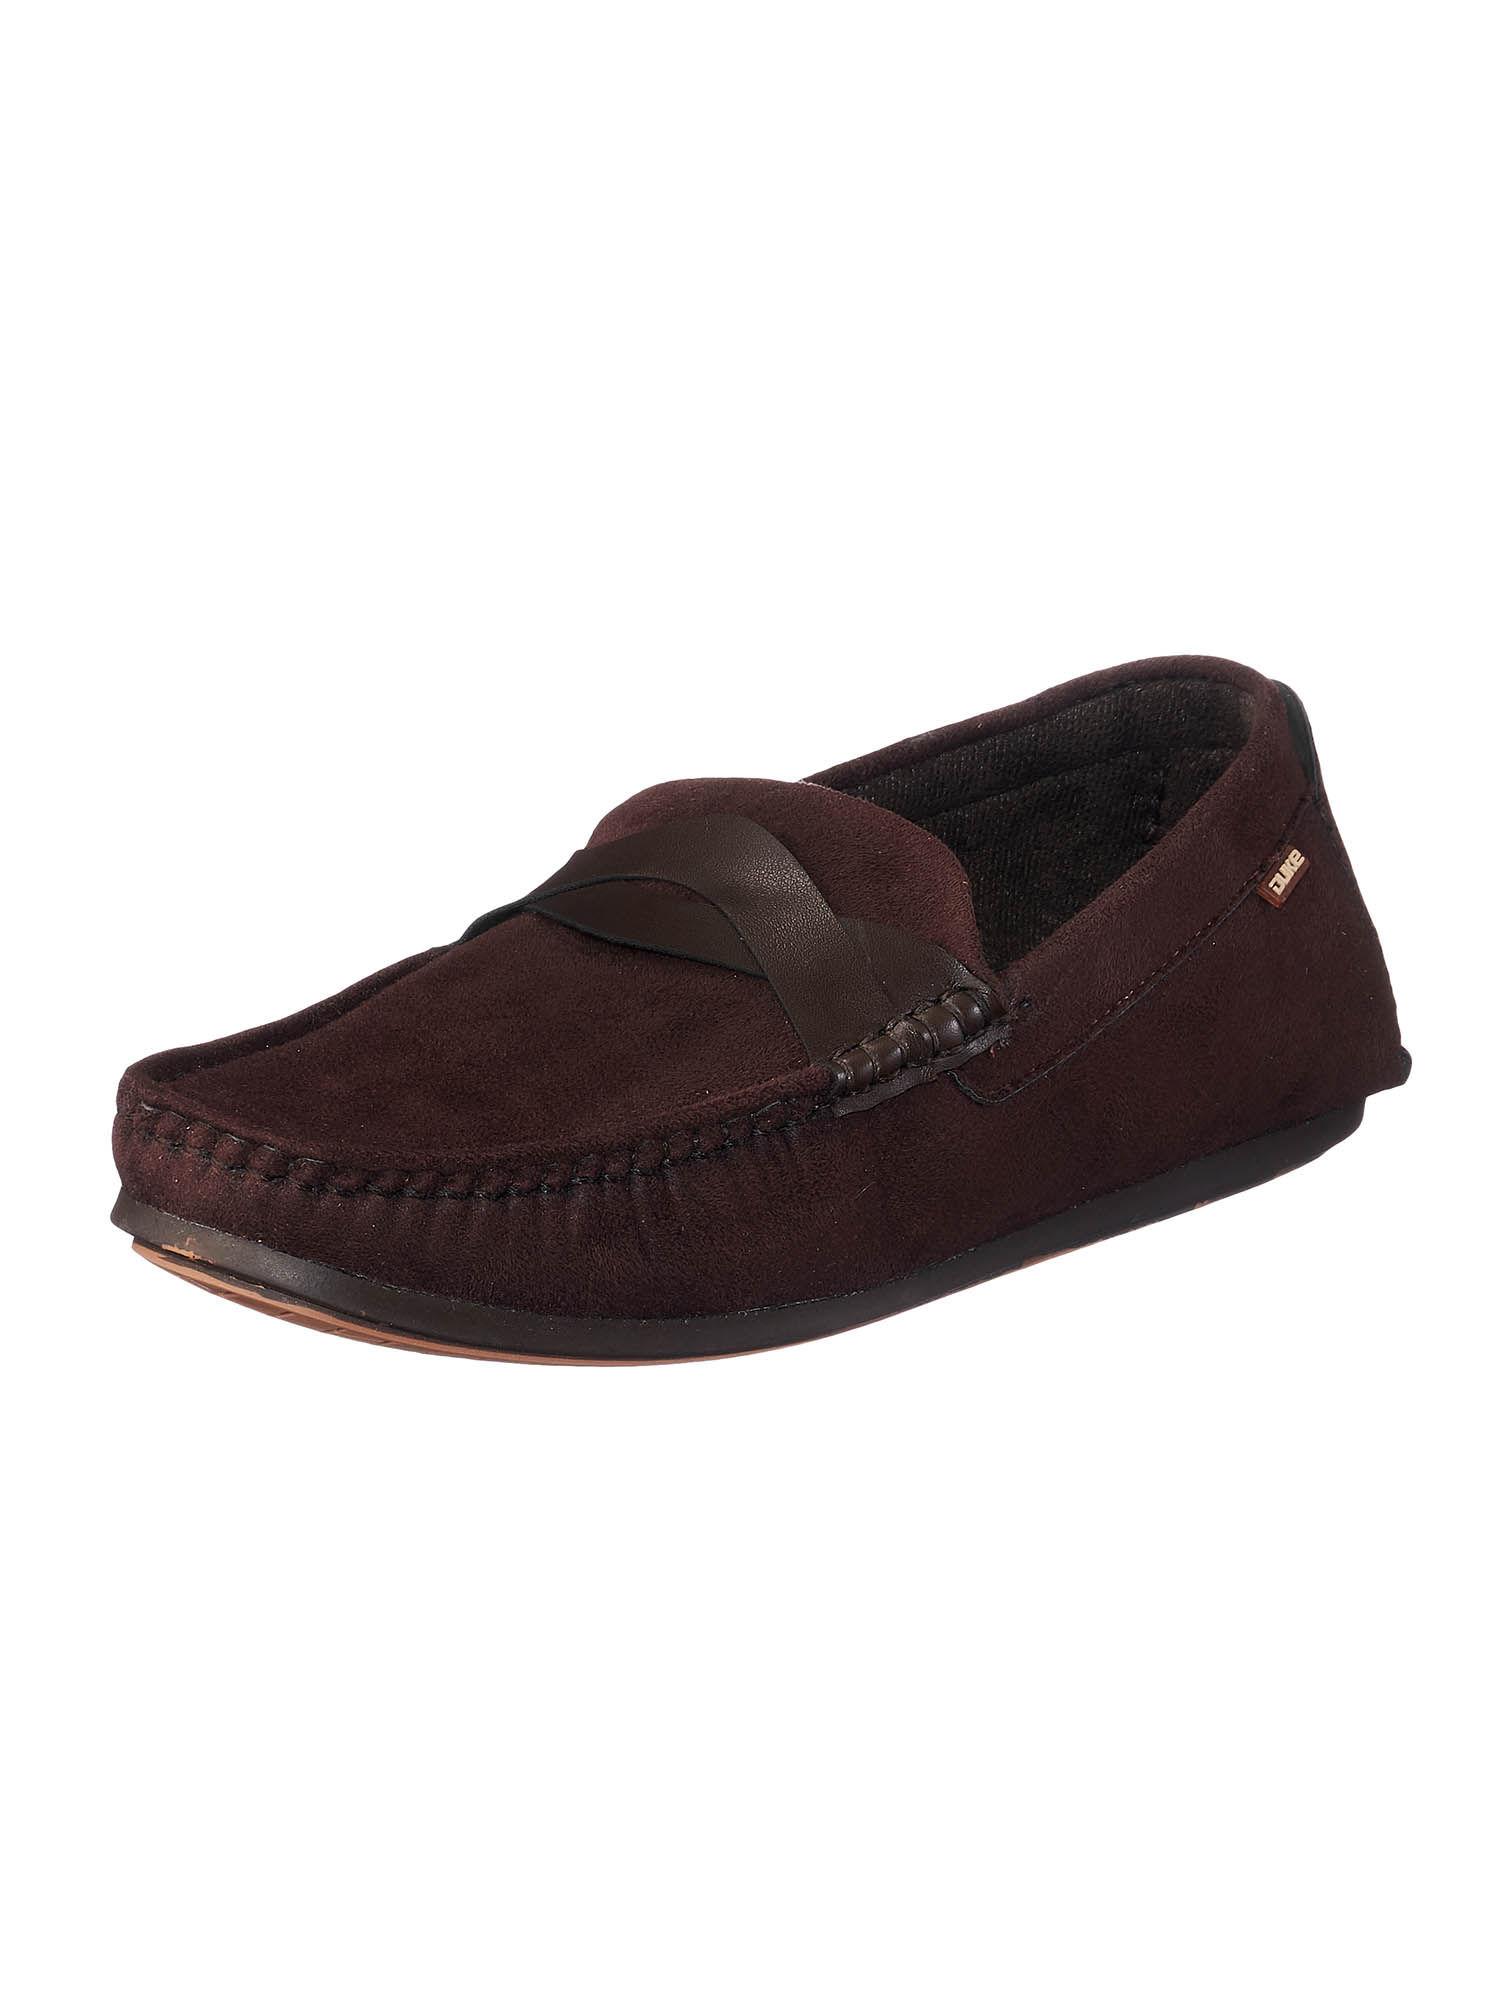 brown solid loafers